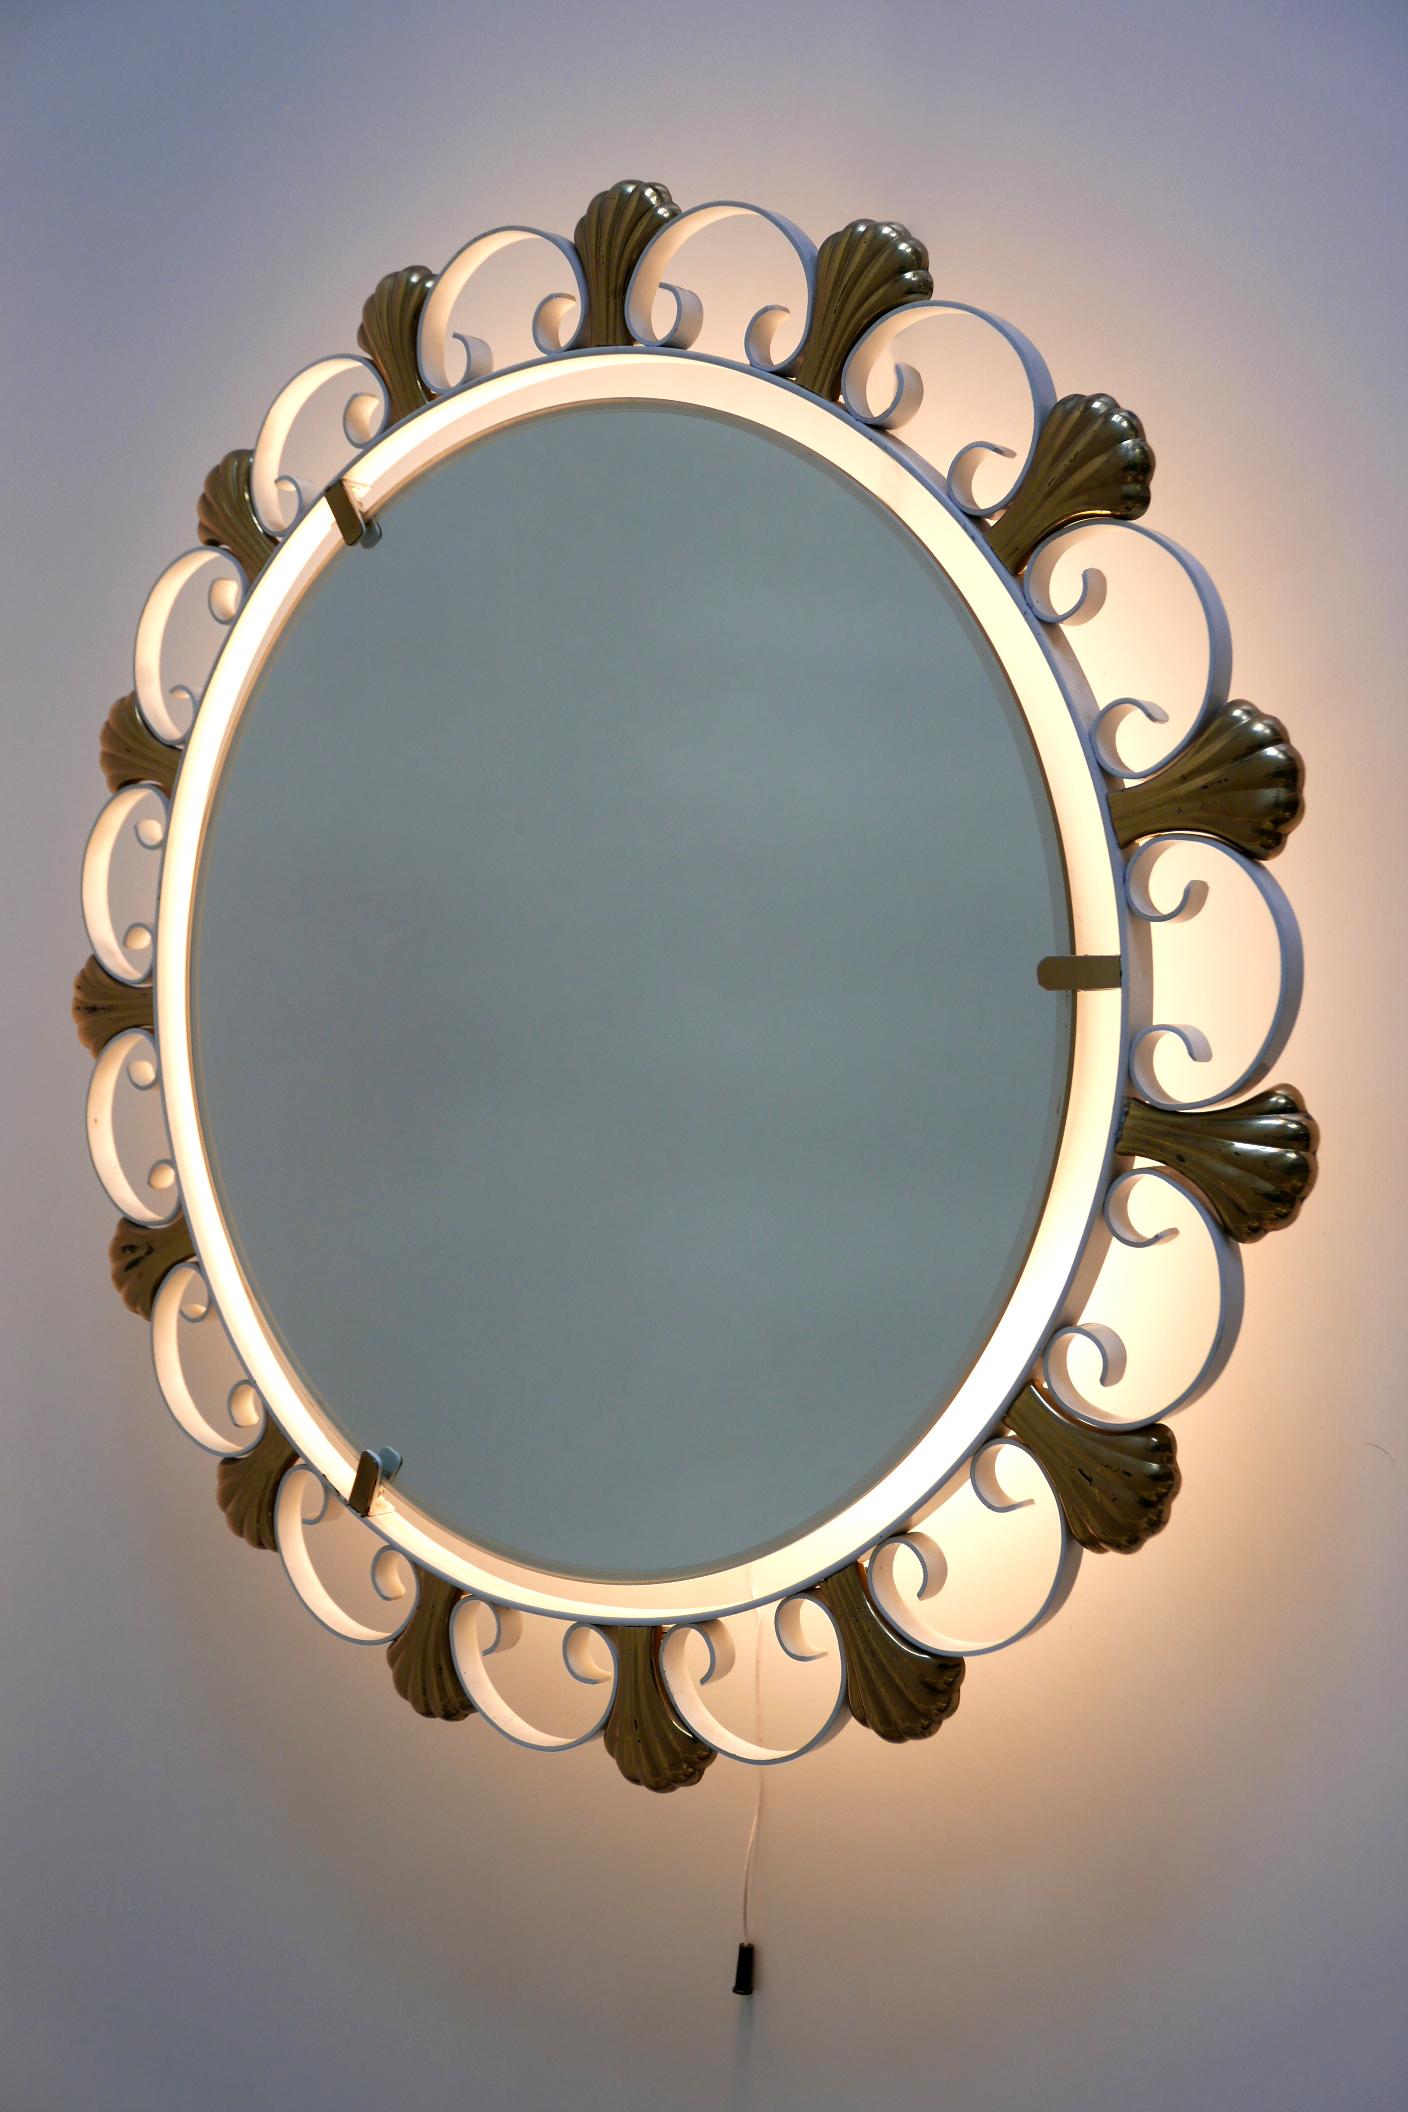 Elegant Mid-Century Modern Backlit Wall Mirror by Hillebrand, 1960s, Germany For Sale 2